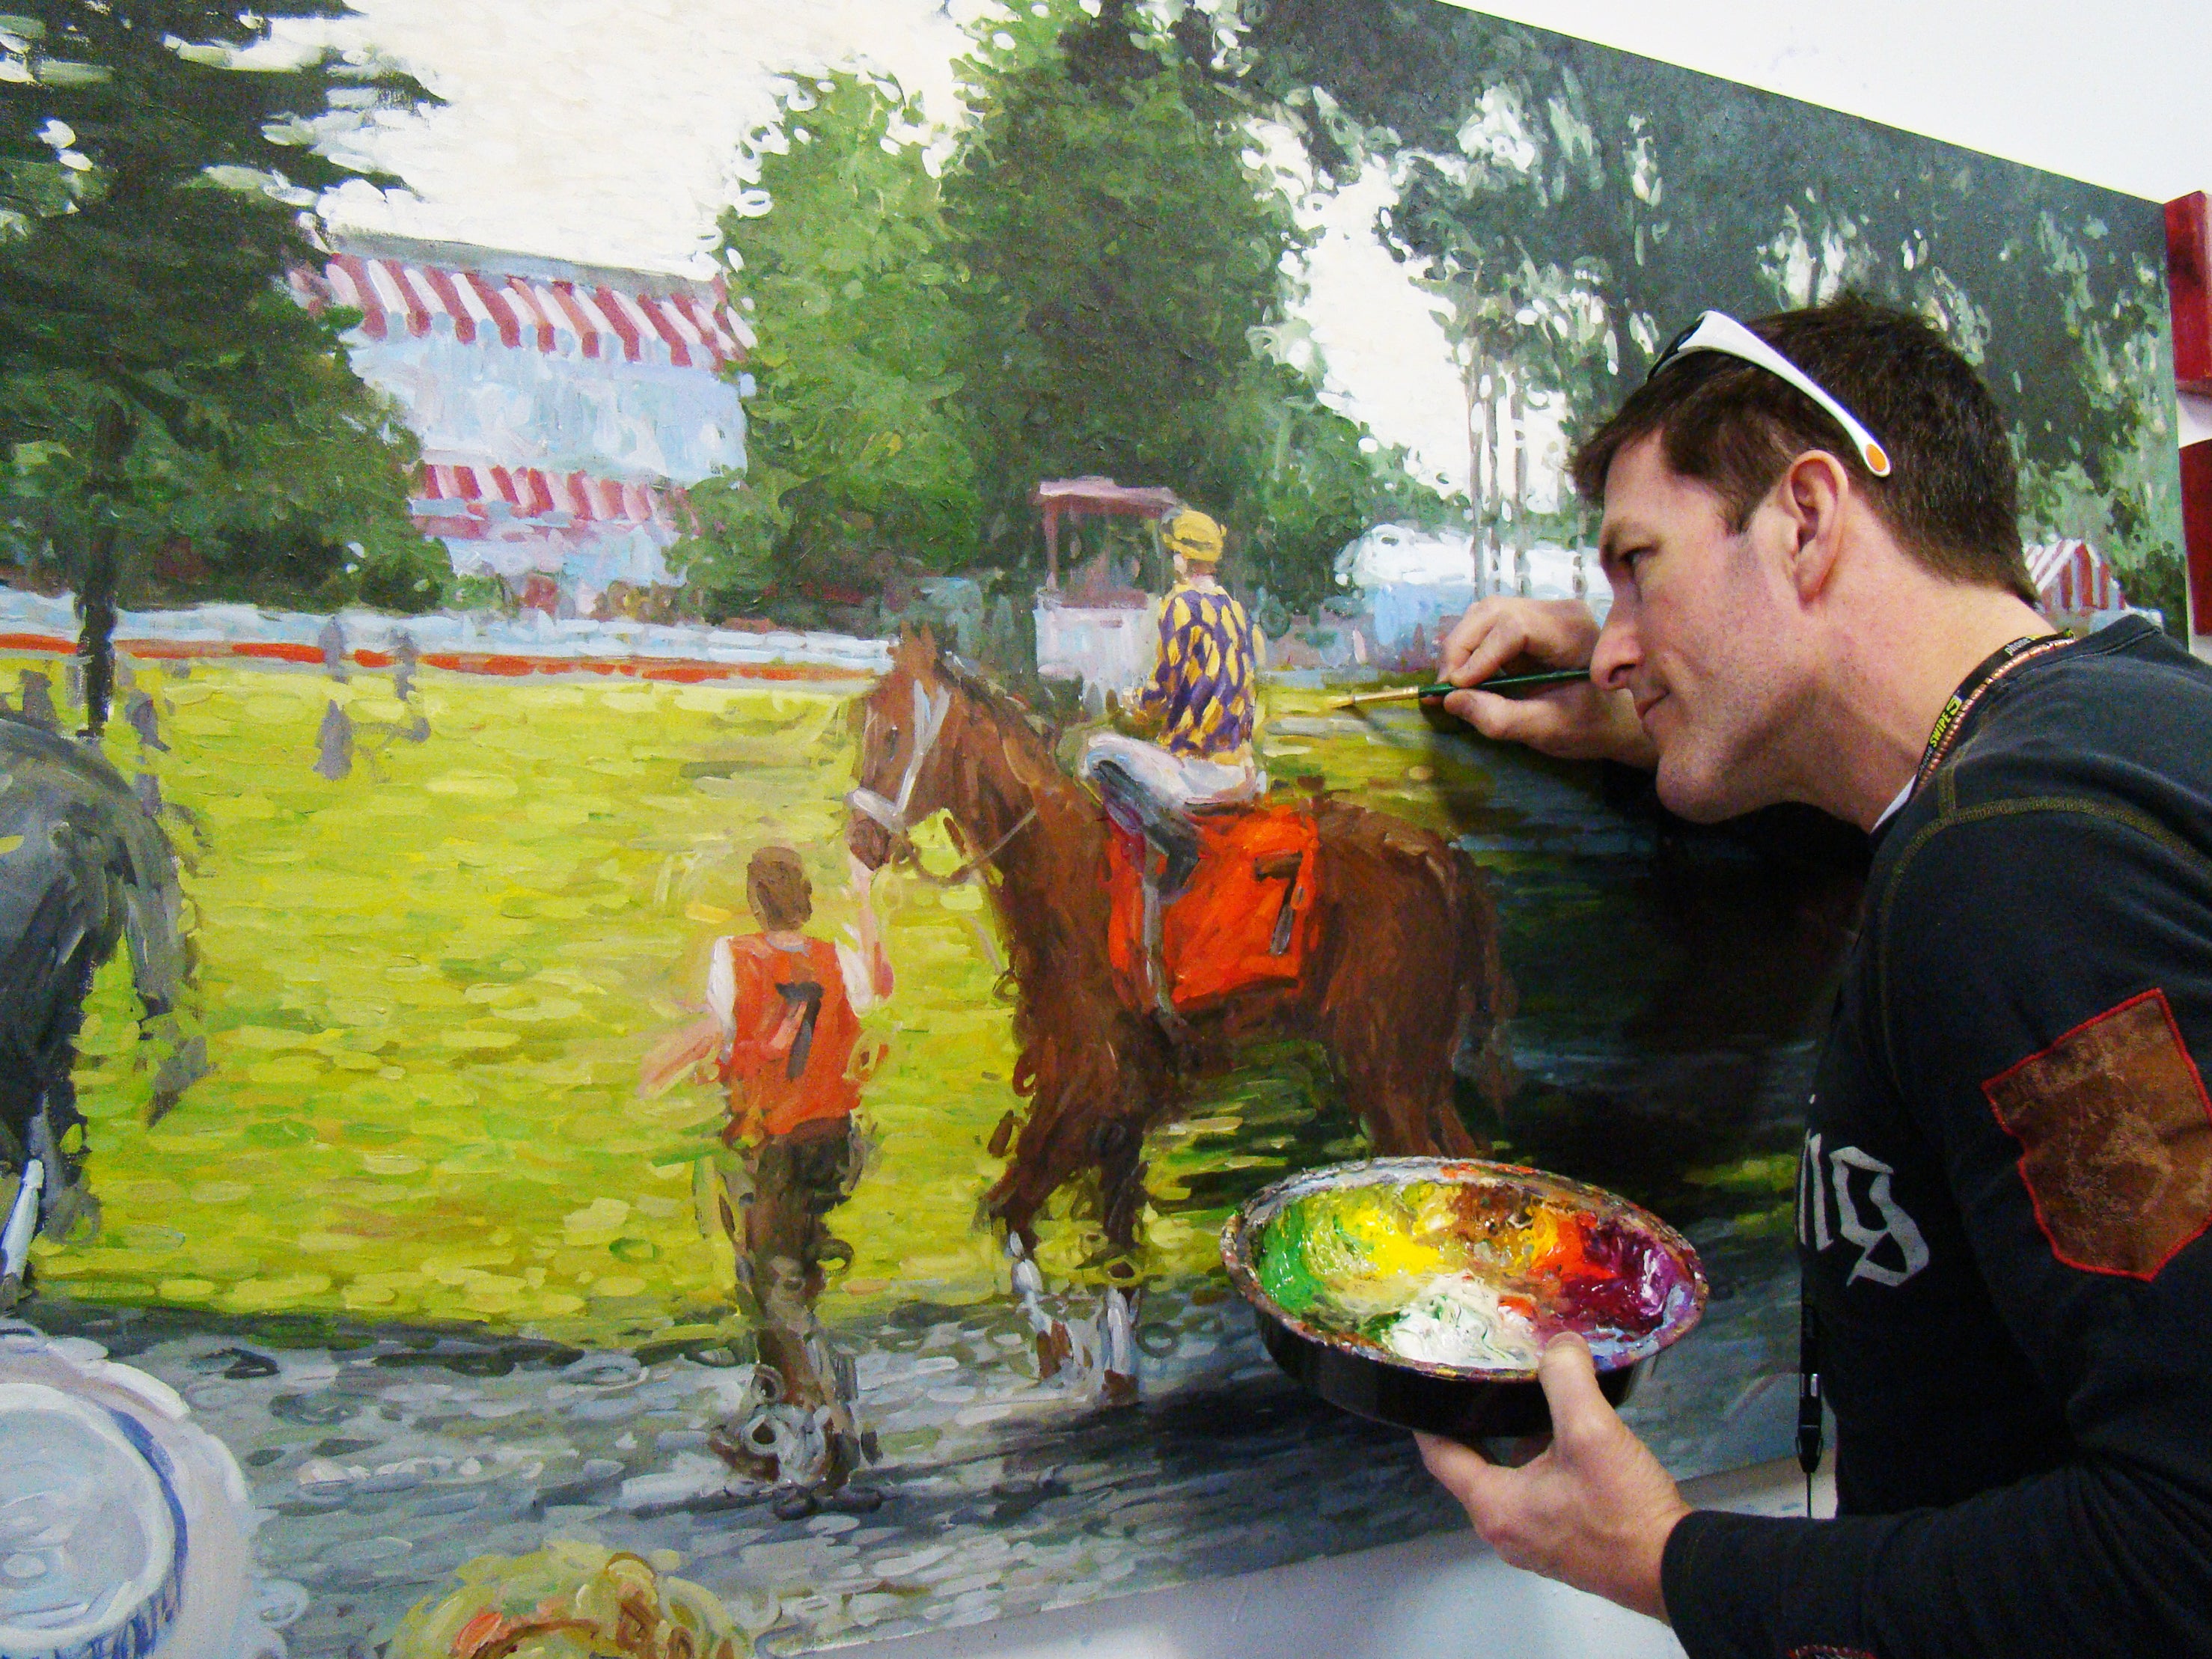 Artist Tom Myott working in his studio on a painting of a scene at Saratoga Race Course. The image shows Myott in profile, meticulously applying paint to a canvas that depicts a jockey on horseback with a stable hand leading them. The painting style is expressive and colorful, with broad brushstrokes capturing the lively atmosphere of the racetrack. In the foreground, Myott holds a palette rich with vibrant hues, emphasizing the artistic process.